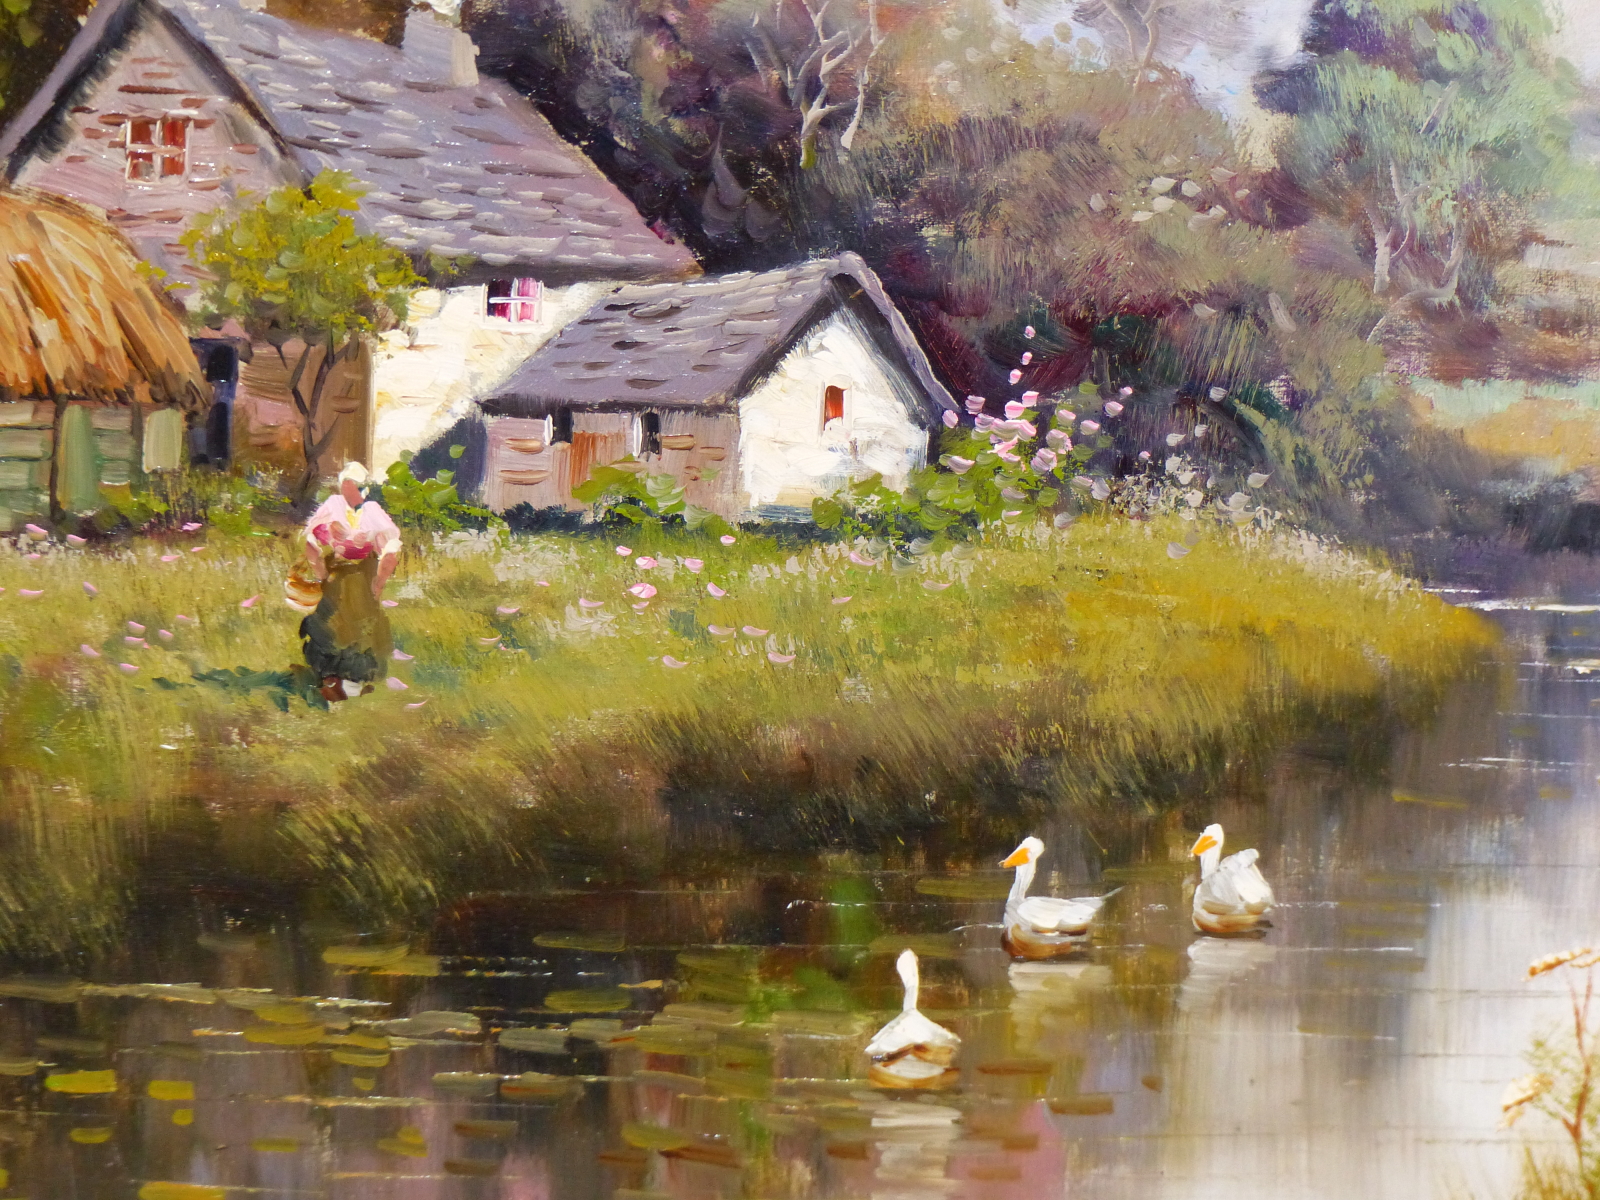 ITALIAN SCHOOL (20TH CENTURY), WOMAN FEEDING DUCKS IN A RIVER LANDSCAPE, INDISTINCTLY SIGNED, OIL ON - Image 4 of 5